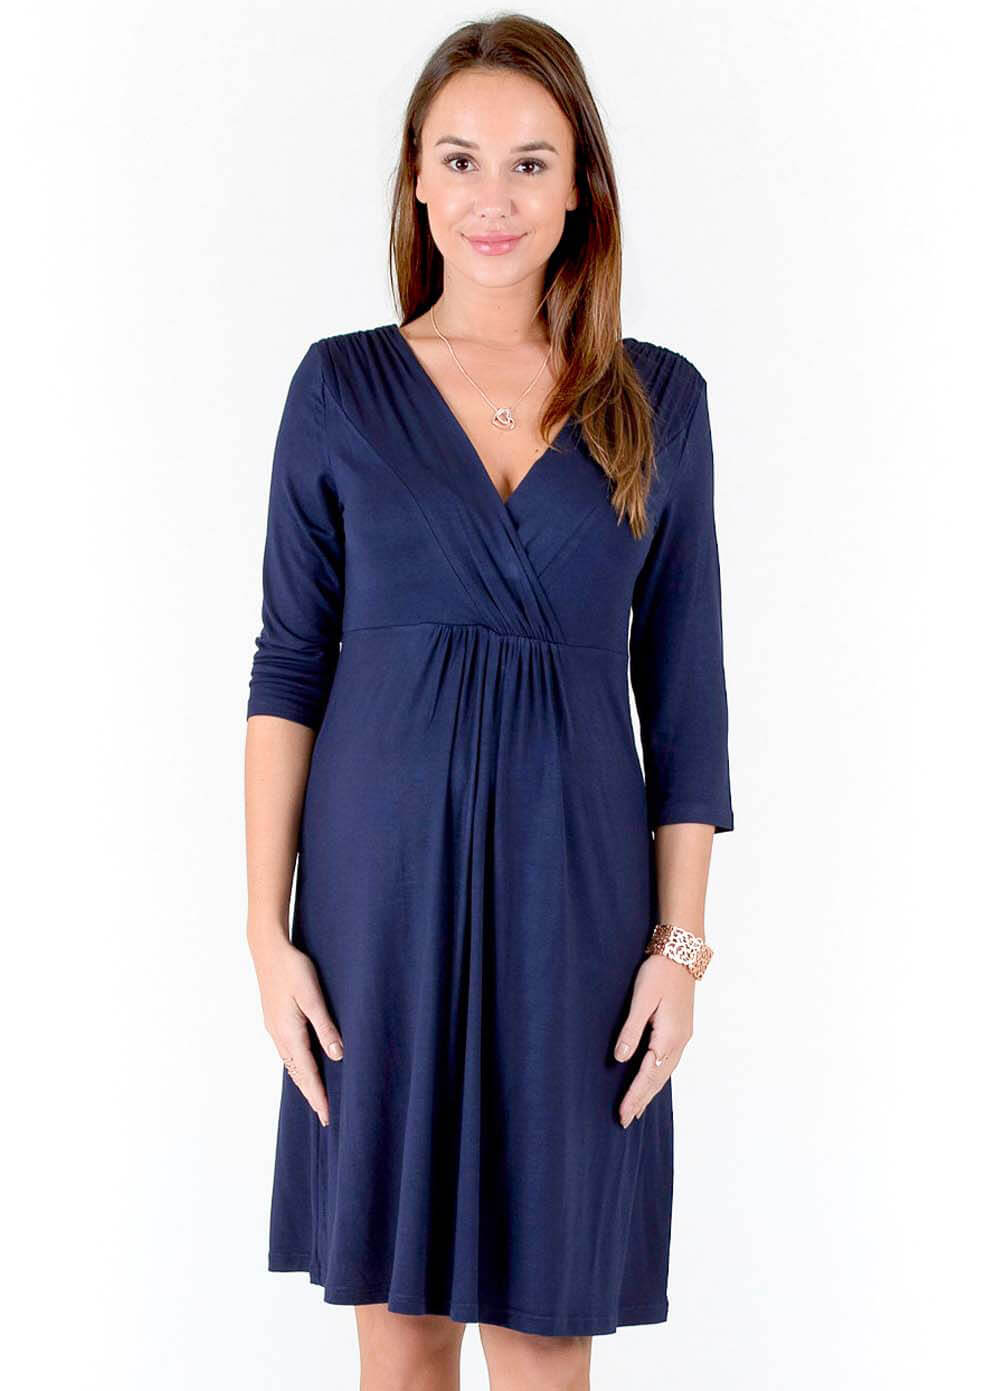 Queen Bee Jacque Maternity Nursing Dress in Blue from Lait & Co